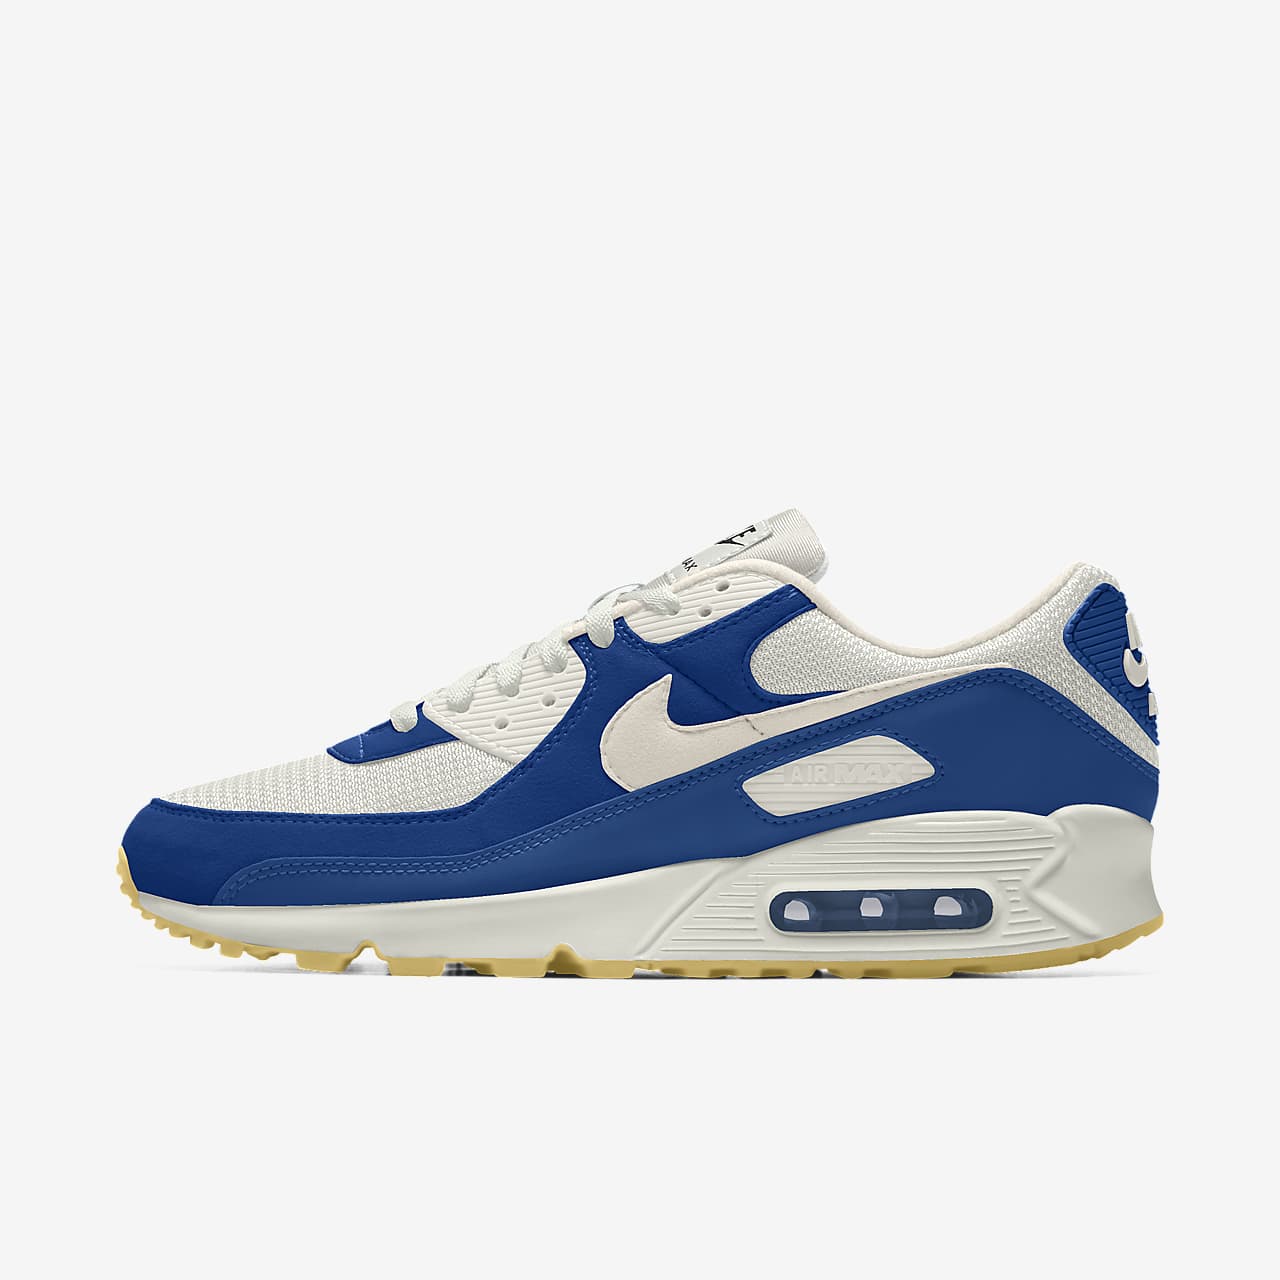 Scarpa personalizzabile Nike Air Max 90 By You - Uomo. Nike IT العاب سيجا